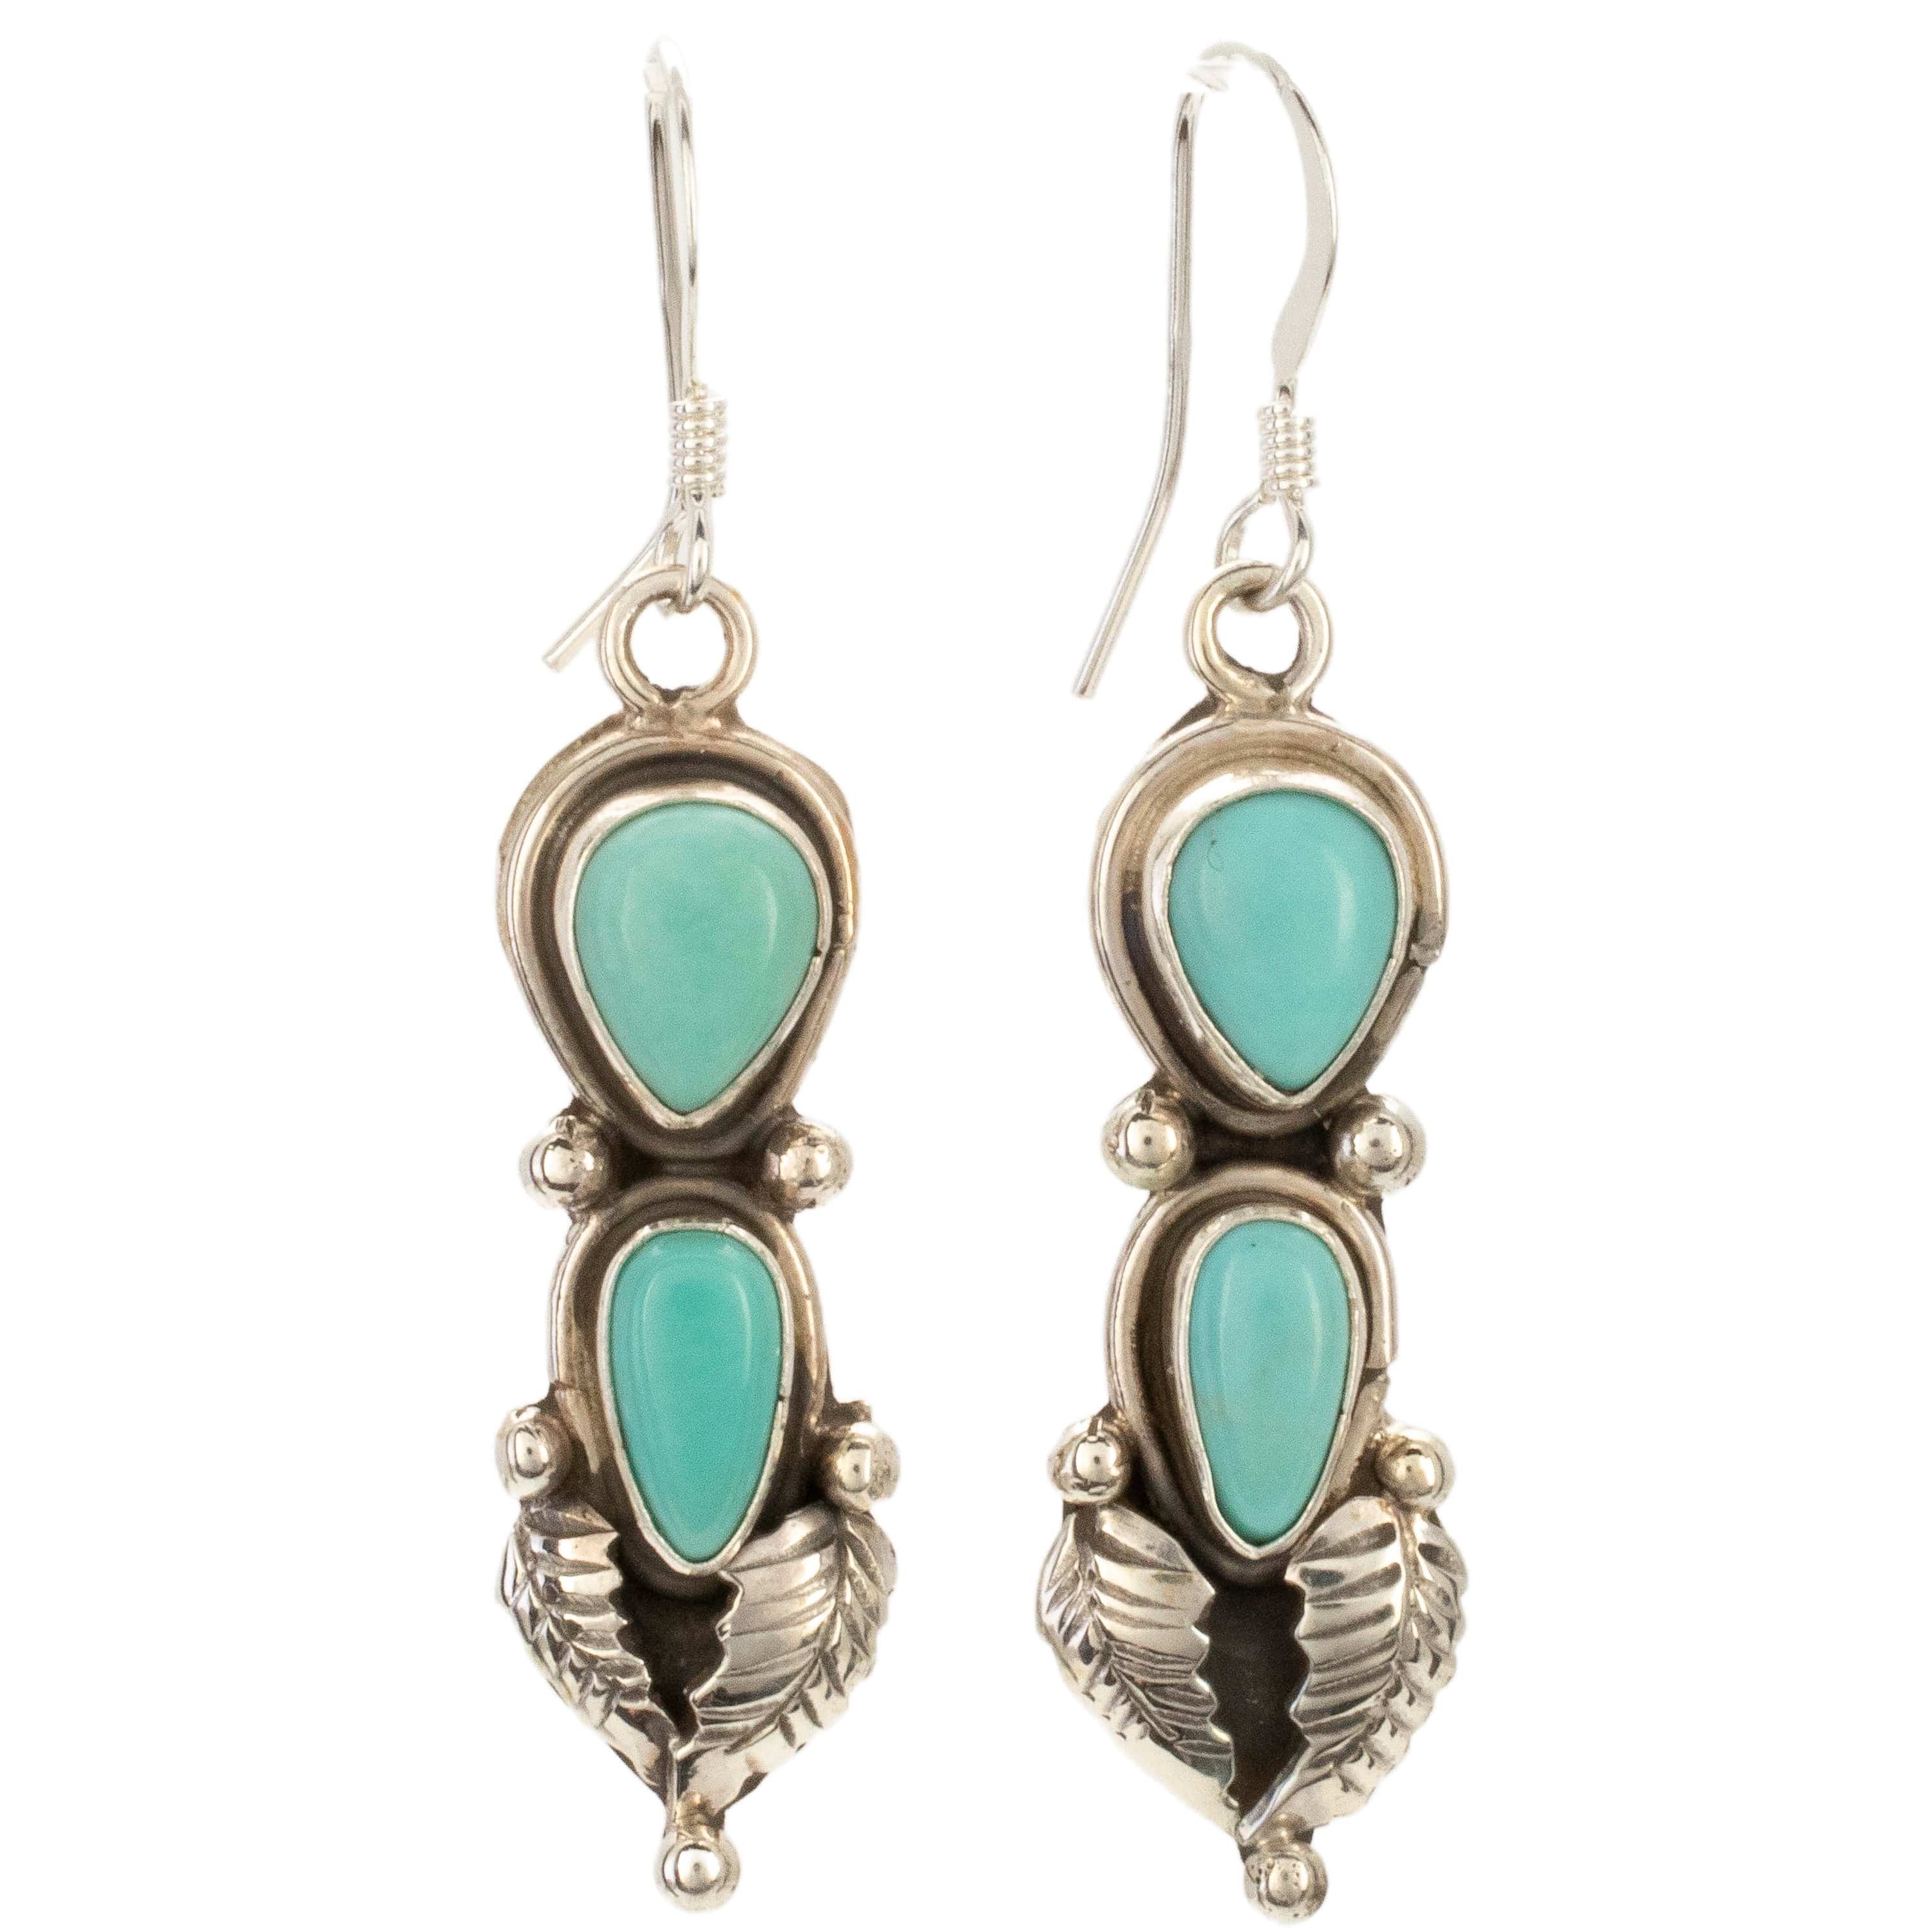 Kalifano Native American Jewelry Kingman Turquoise Feather USA Native American Made 925 Sterling Silver Dangly Earrings with French Hook NAE300.018